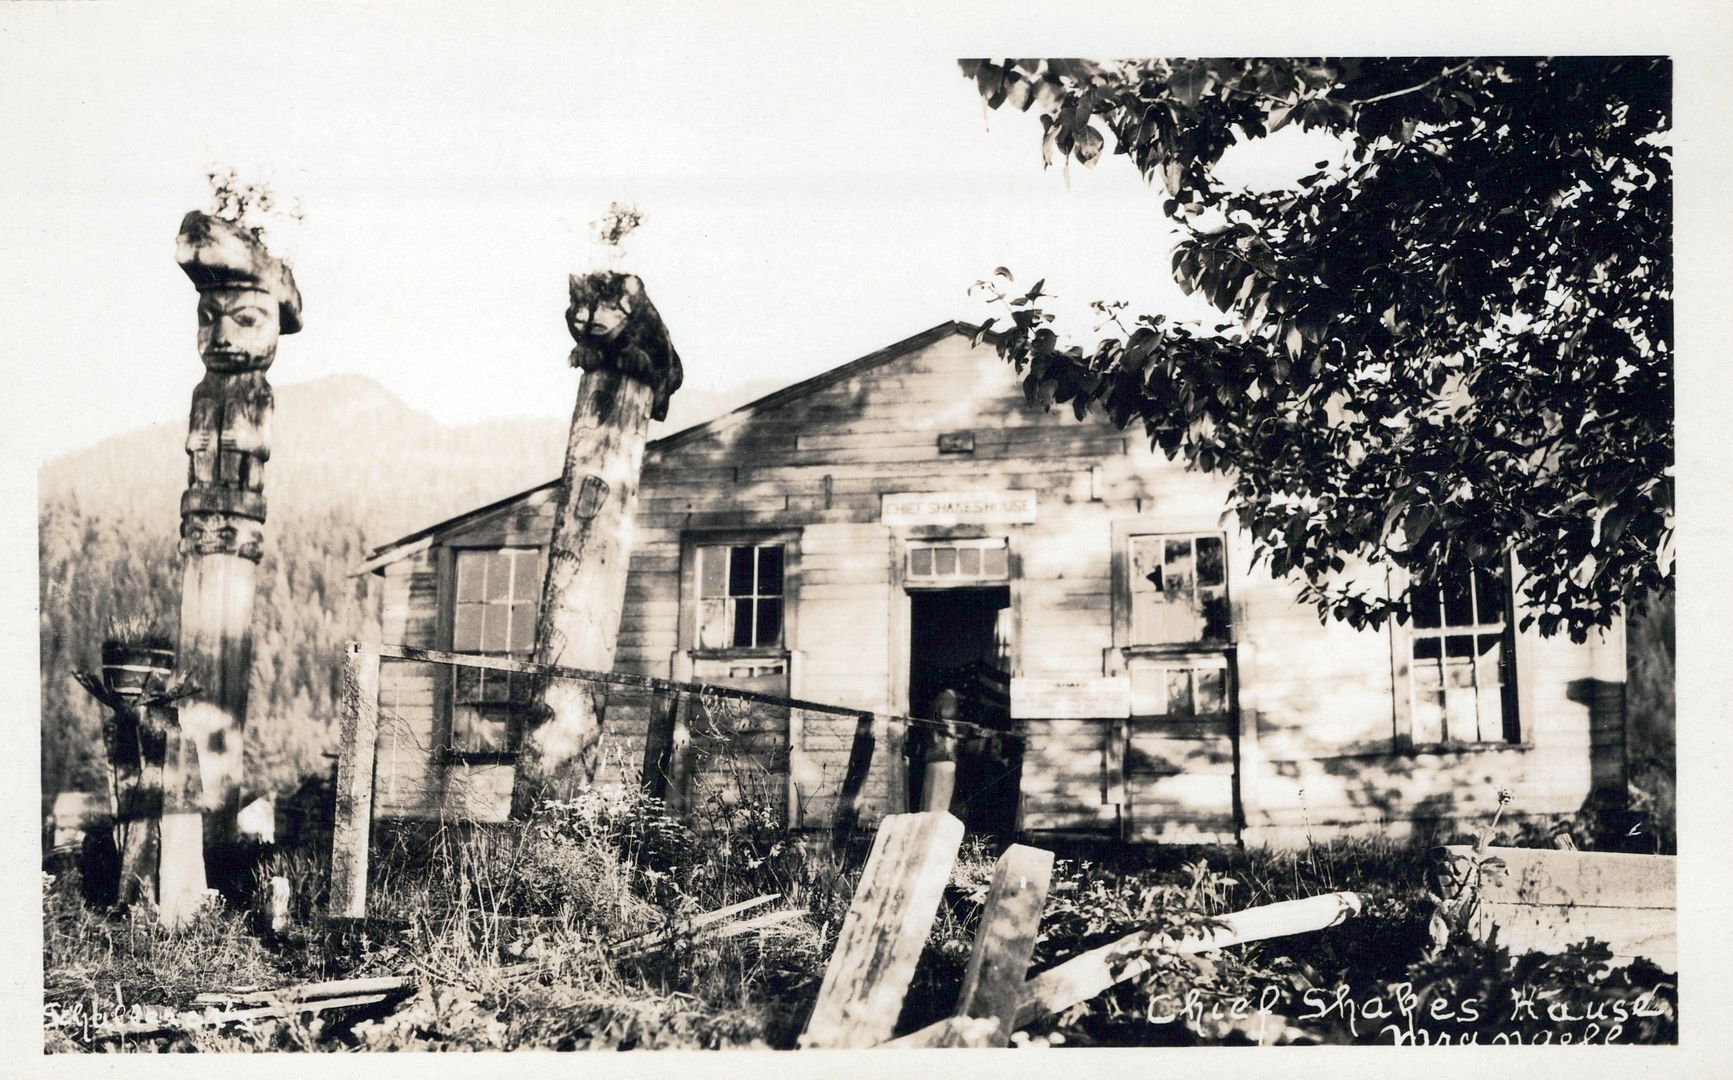 WRANGELL AK - Chief Shakes House Real Photo Postcard rppc - Picture 1 of 2